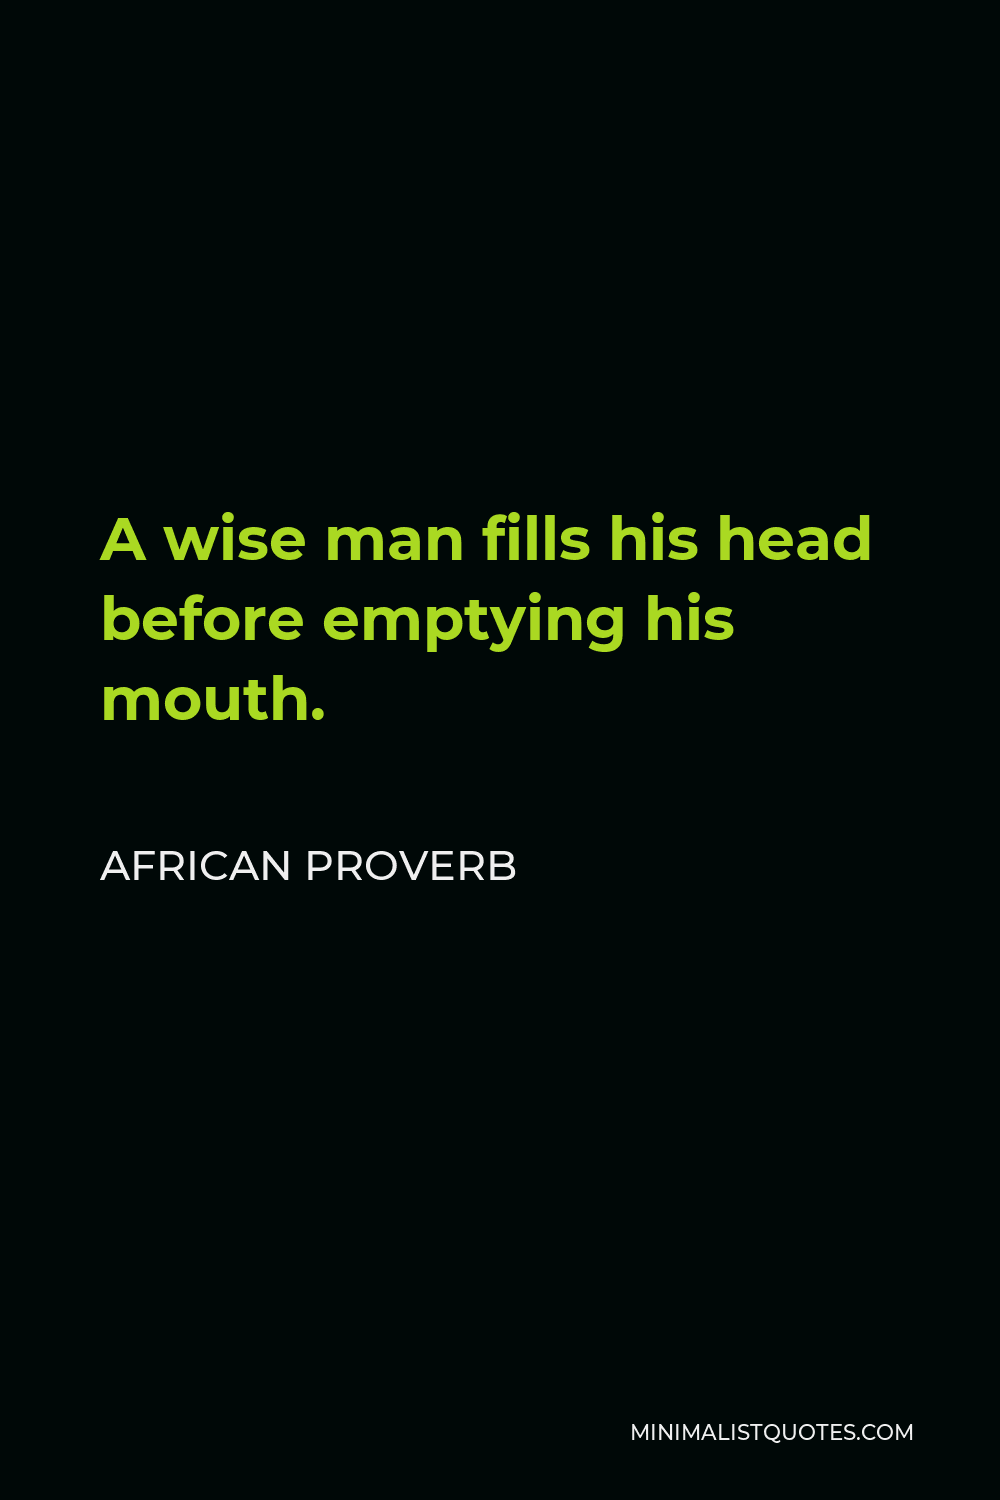 African Proverb Quote - A wise man fills his head before emptying his mouth.